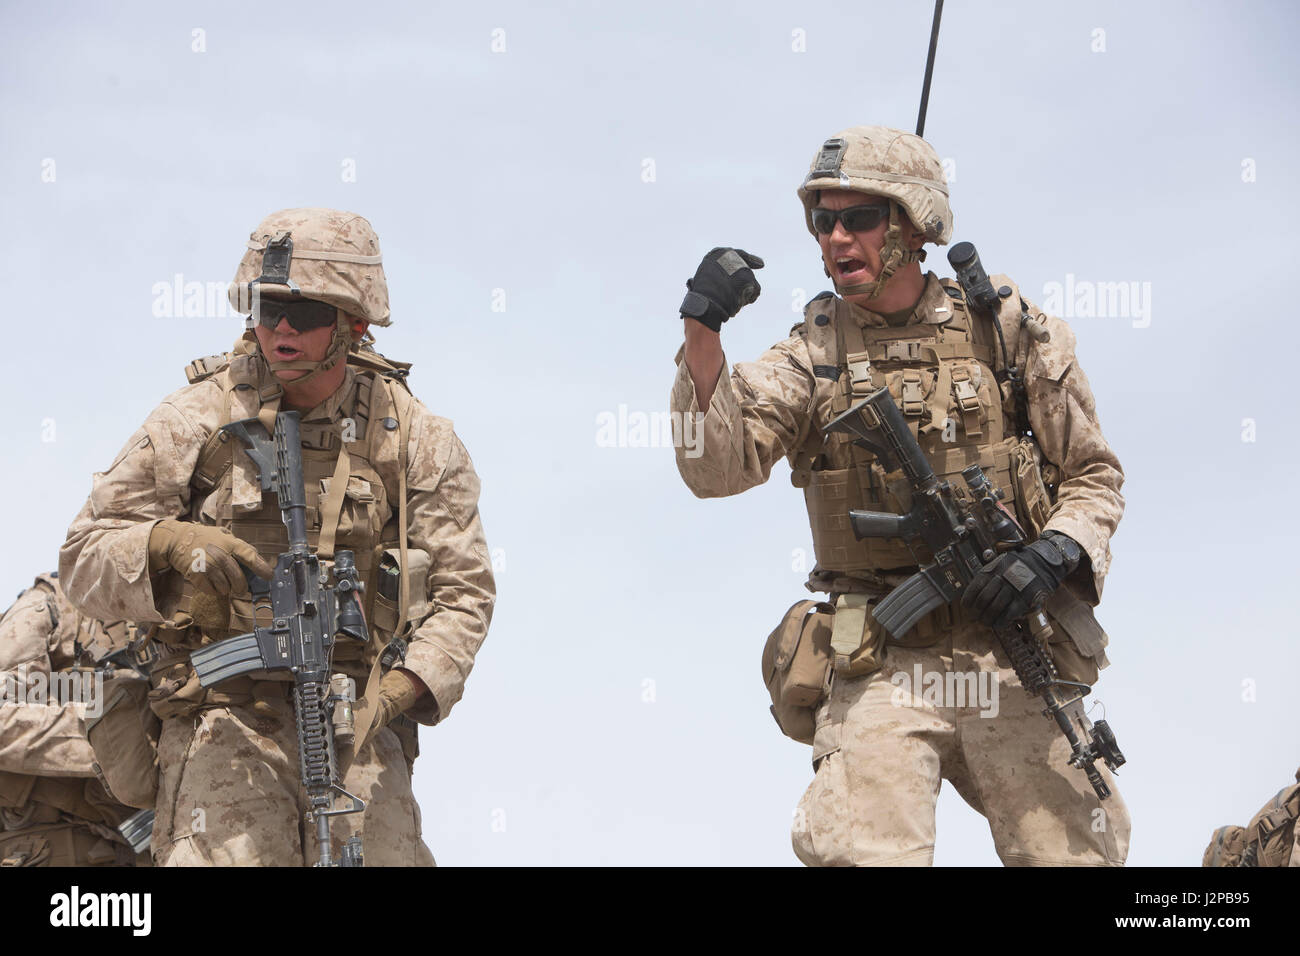 U.S. Marine Corps 2nd Lt. Hugo J. Jury, right, a platoon commander with Golf Company, 2nd Battalion, 6th Marine Regiment, 2nd Marine Division (2d MARDIV), calls out commands to his platoon during company-level attack live fire training at Range 400 for Talon Exercise (TalonEx) 2-17, Marine Corps Air Ground Combat Center, Twentynine Palms, C.A., April 9, 2017. The purpose of TalonEx was for ground combat units to conduct integrated training in support of the Weapons and Tactics Instructor Course (WTI) 2-17 hosted by Marine Aviation Weapons and Tactics Squadron One (MAWTS-1). (U.S. Marine Corps  Stock Photo